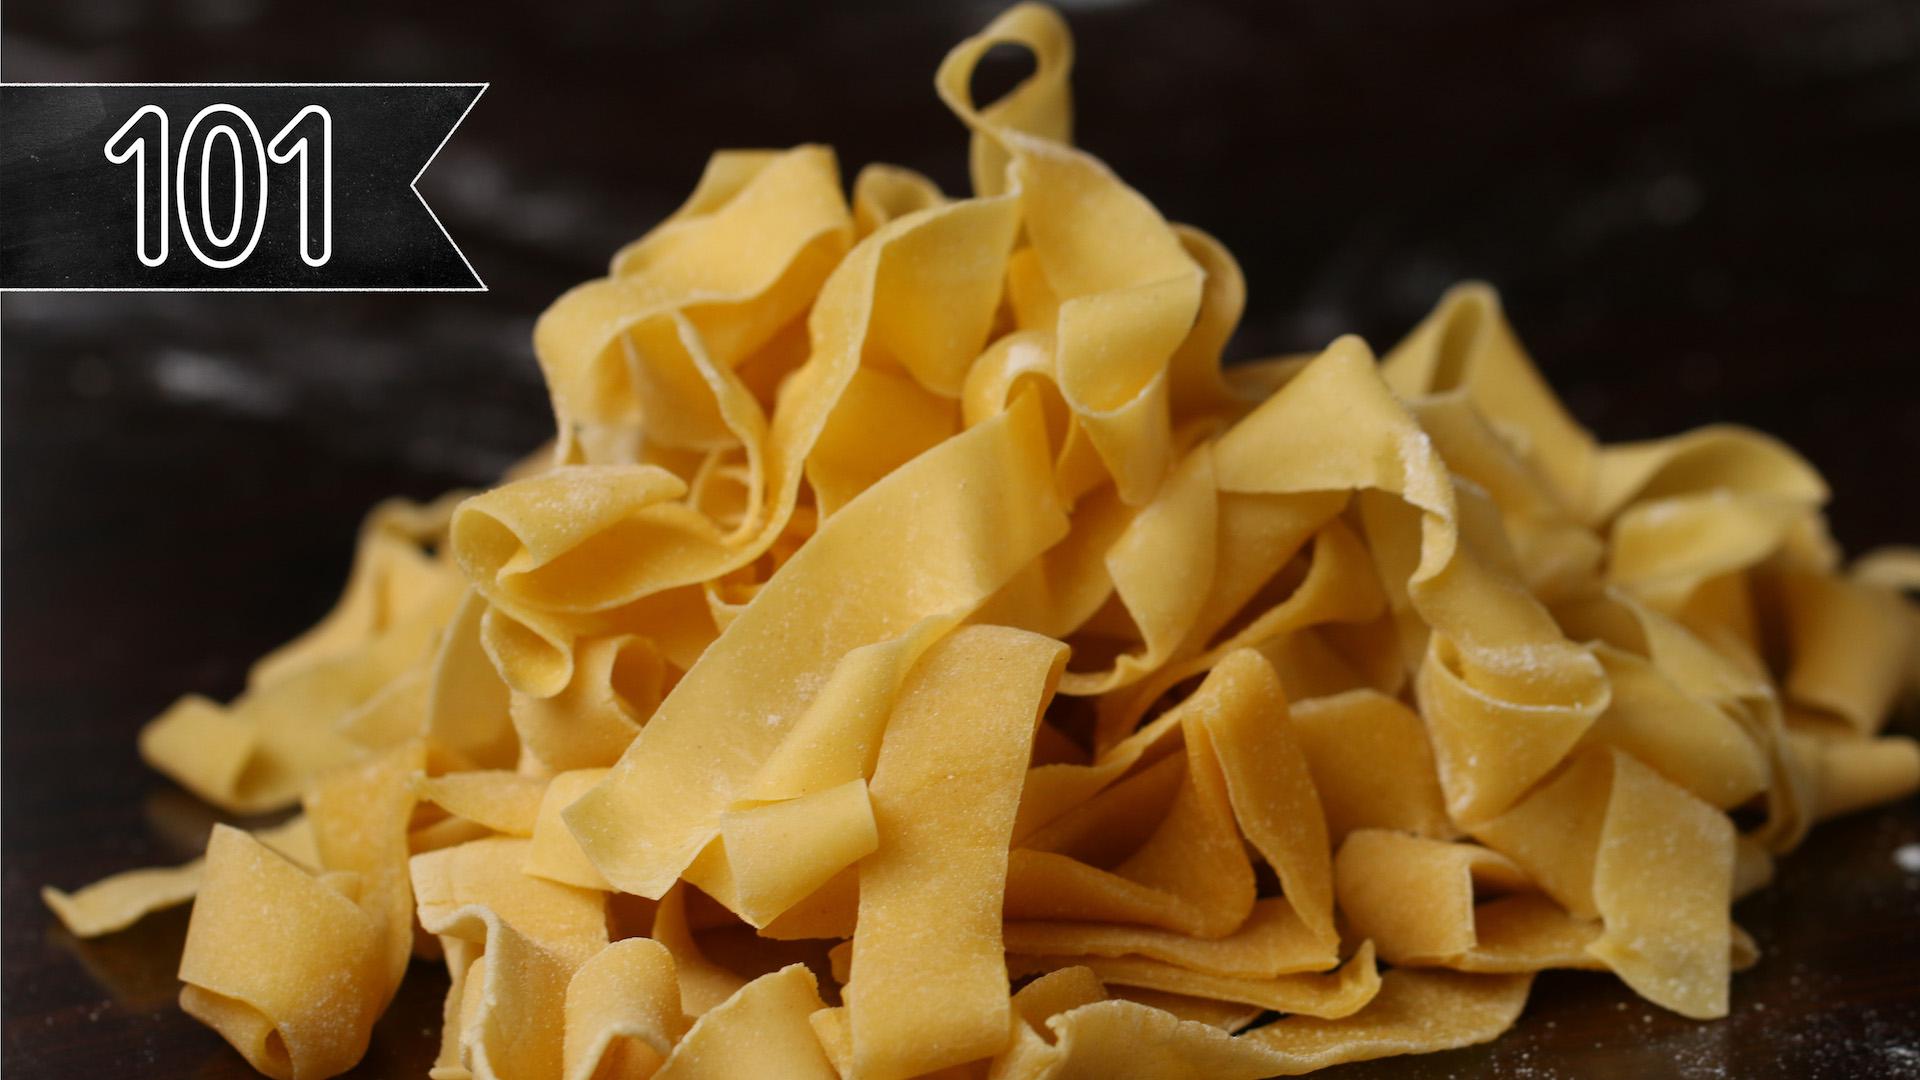 Homemade Fresh Pasta Recipe - Ingredients and How to Make It